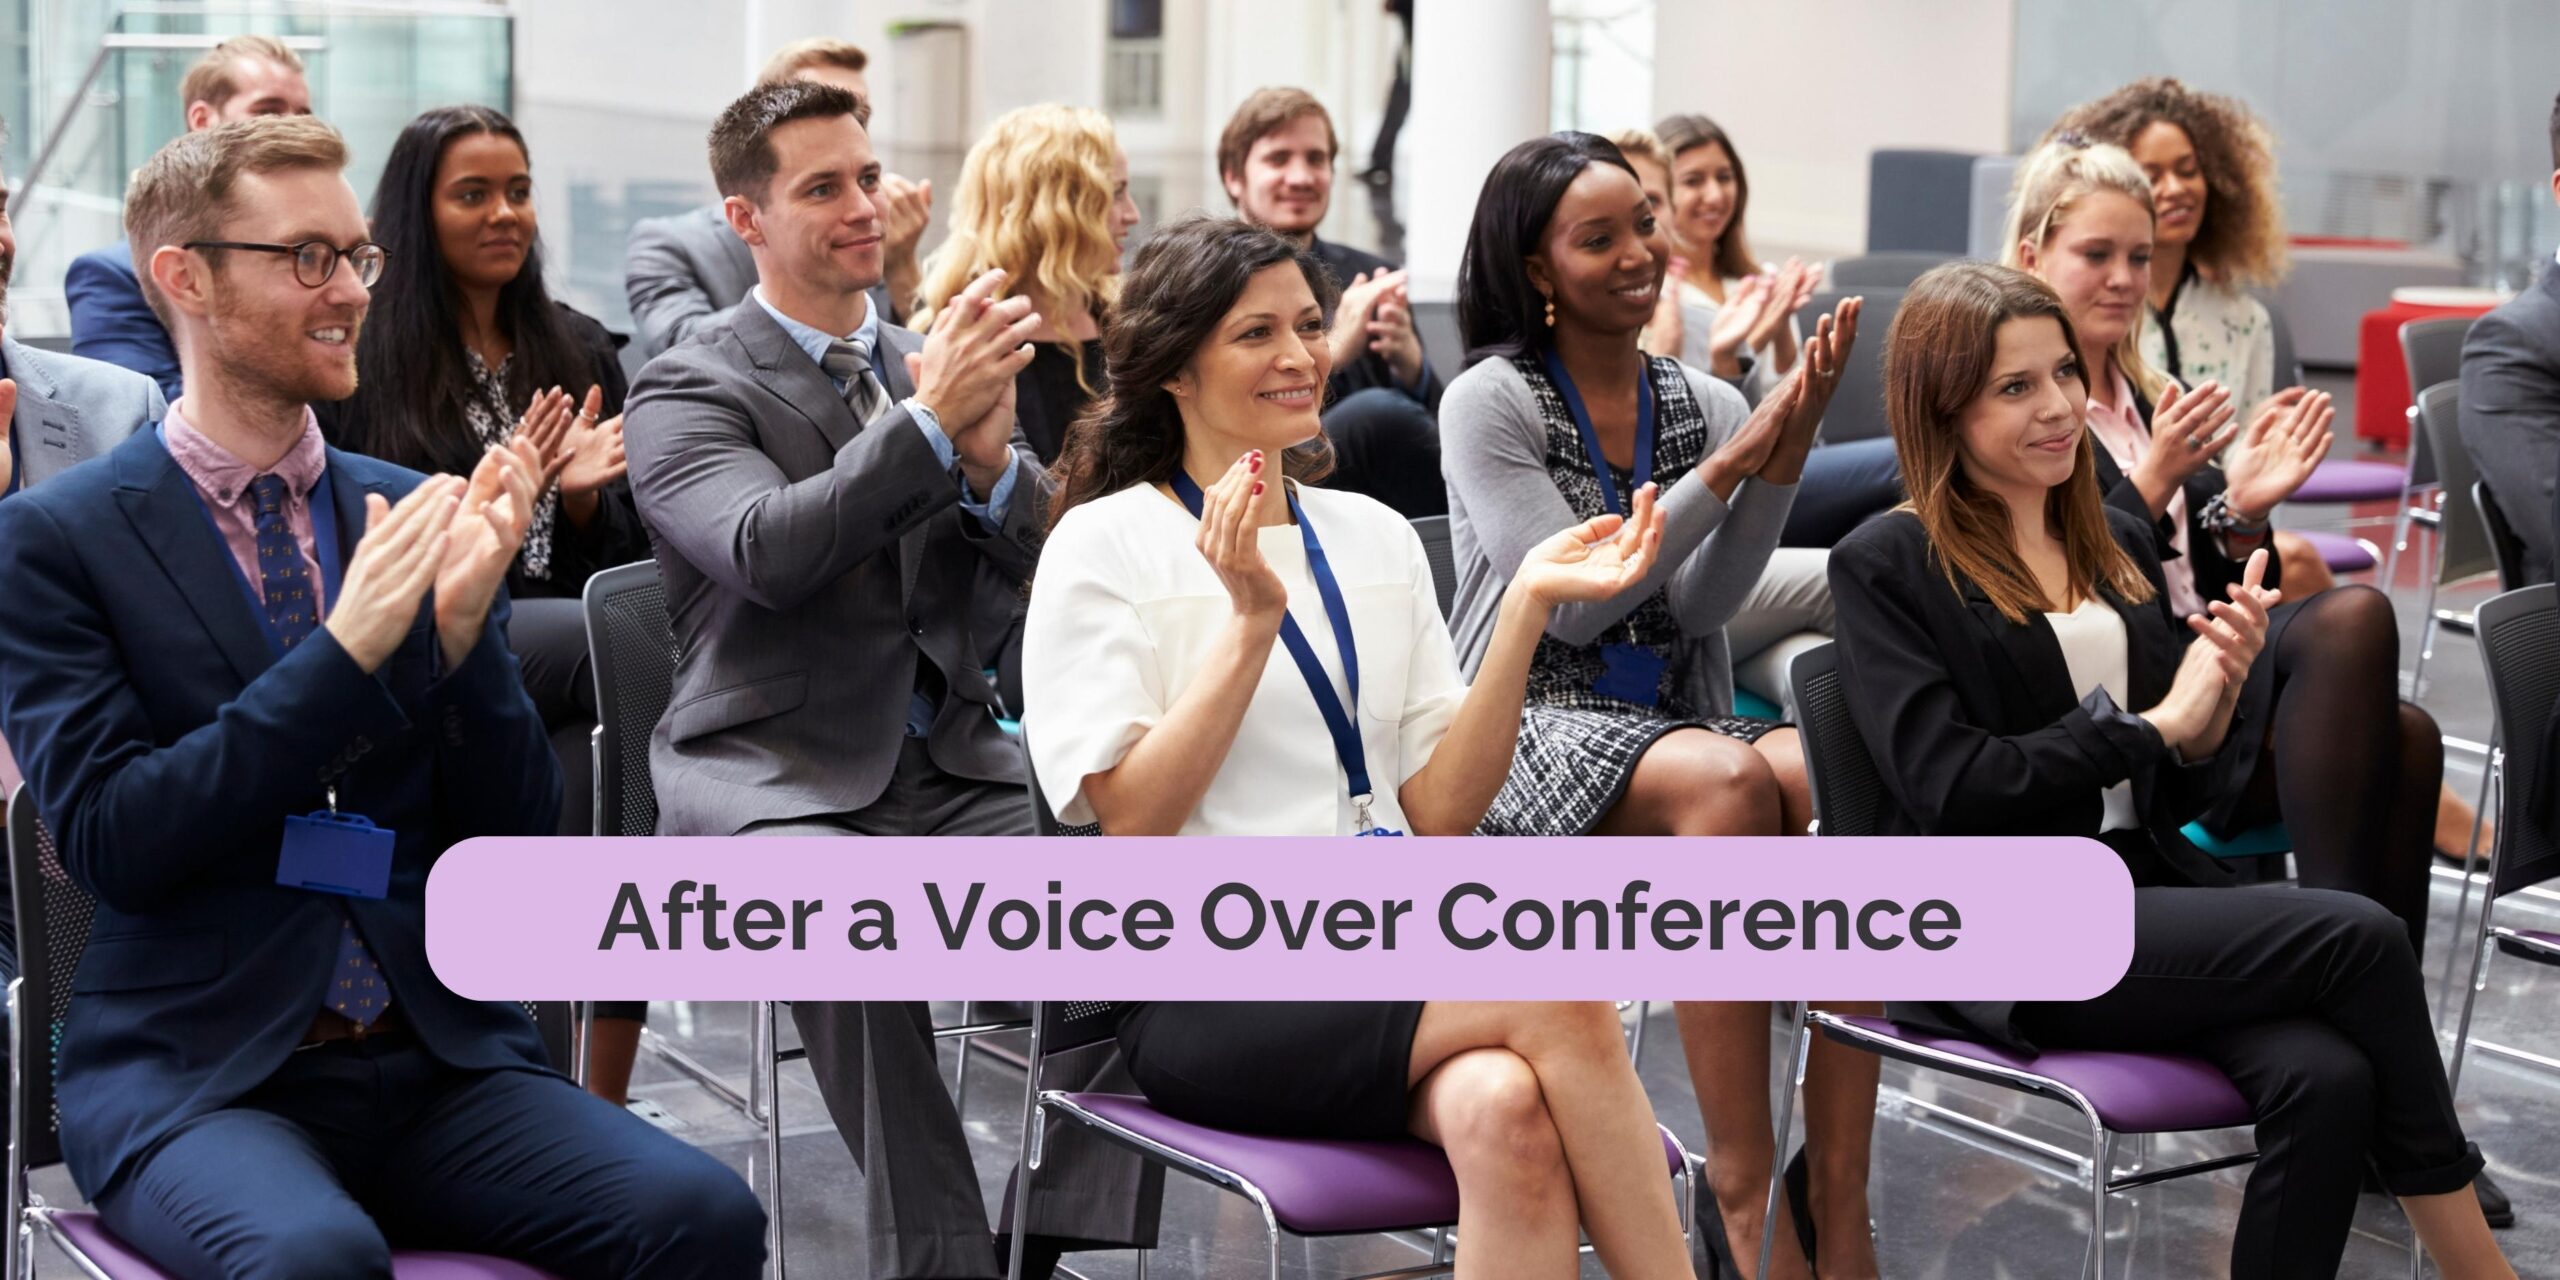 My to-do’s before and after a voice over conference